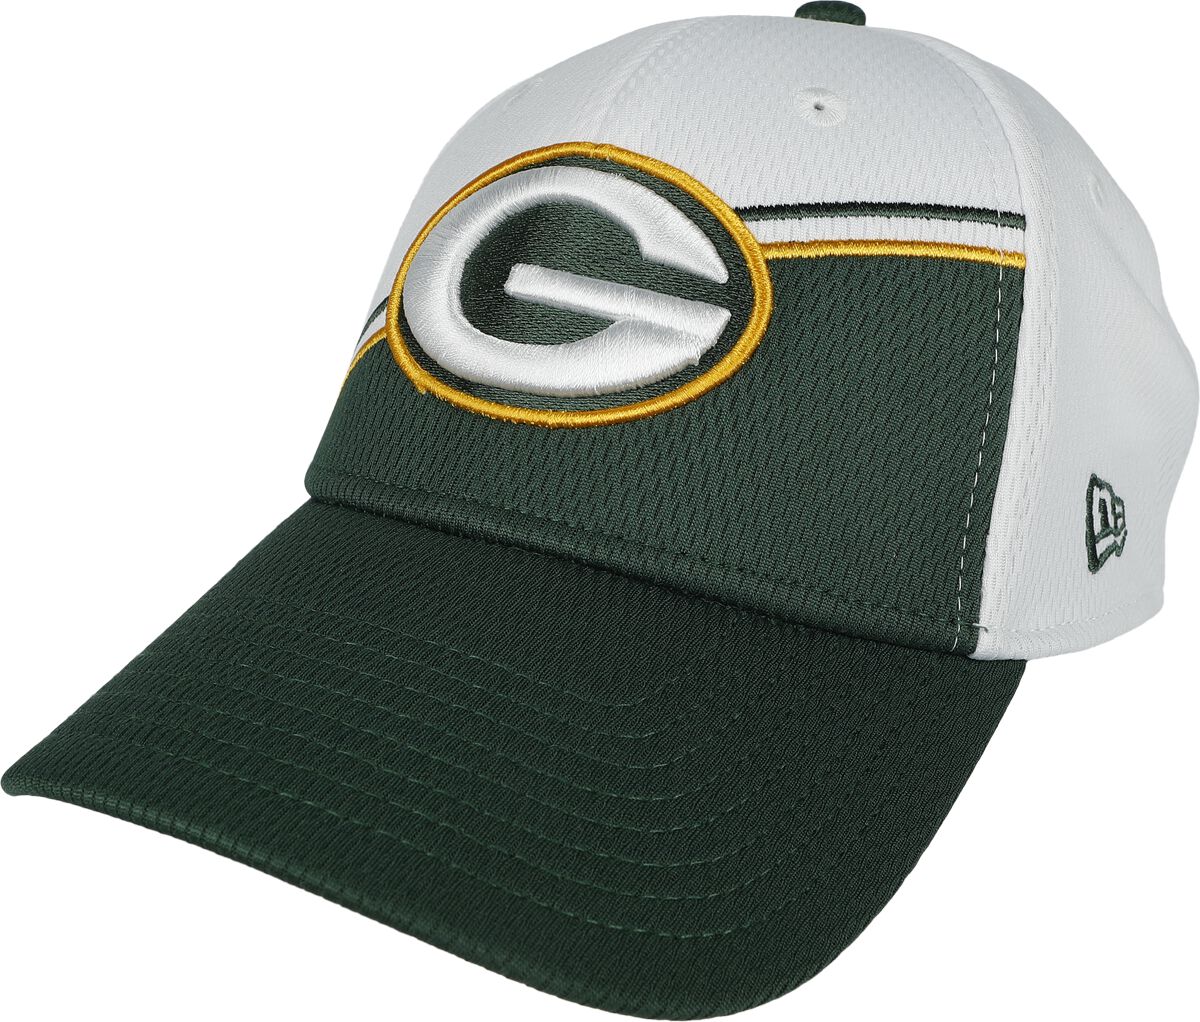 New Era - NFL Cap - 9FORTY Green Bay Packers Sideline - multicolor von New Era - NFL